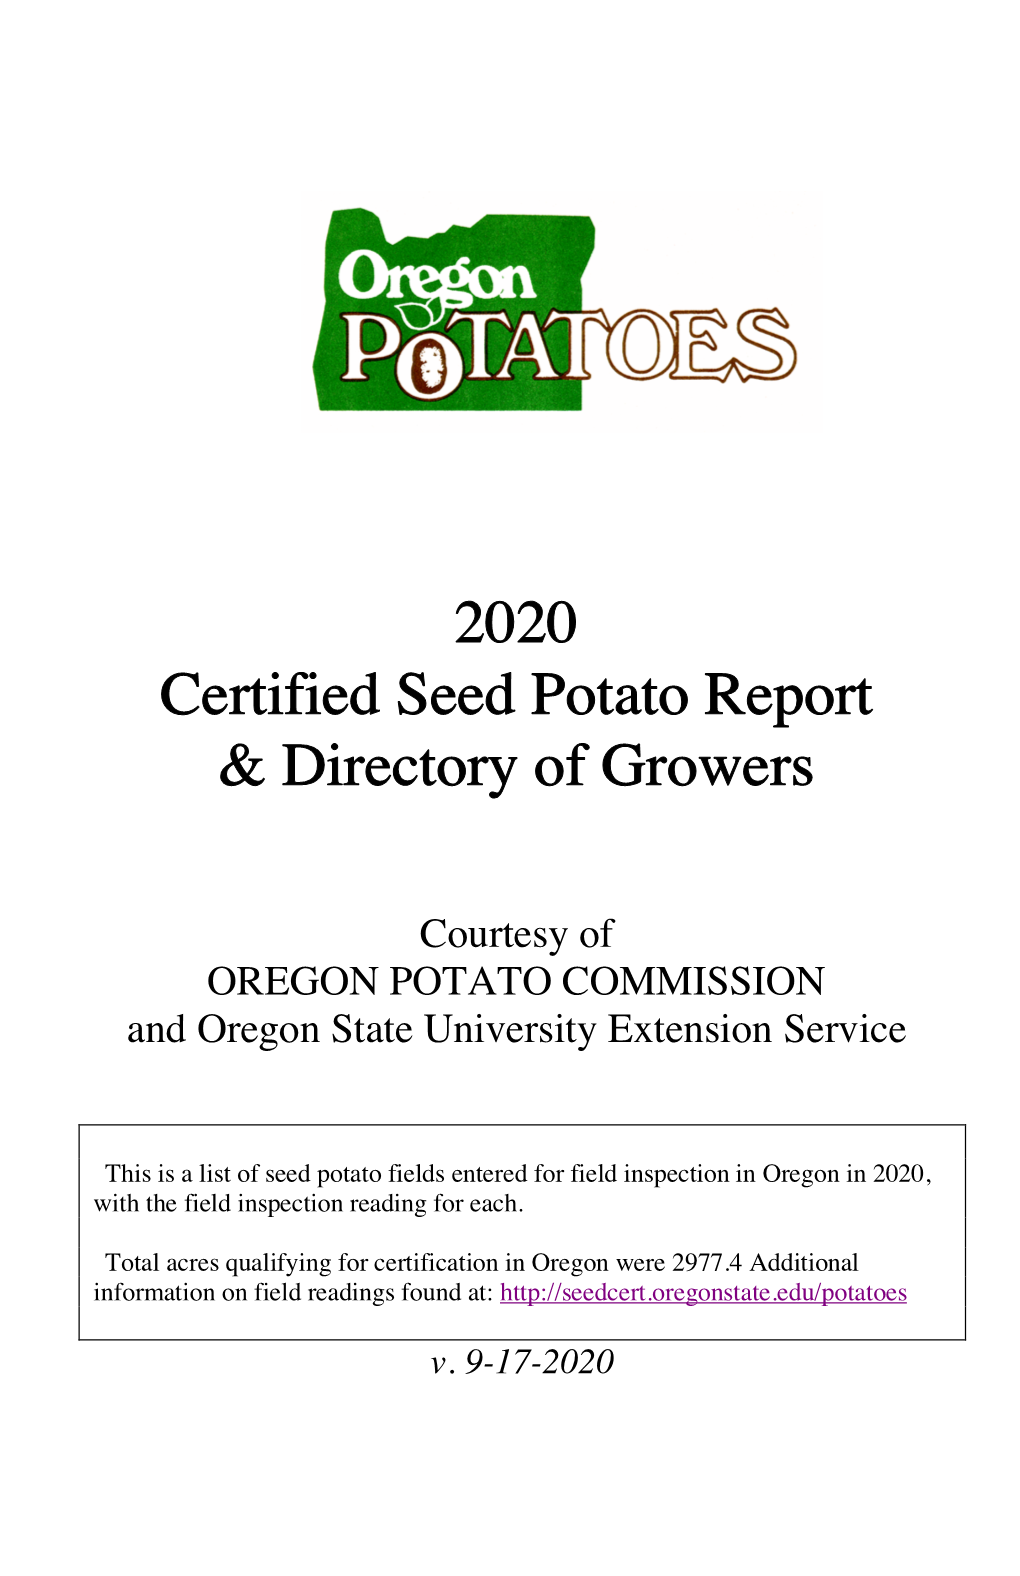 2020 Certified Seed Potato Report & Directory of Growers